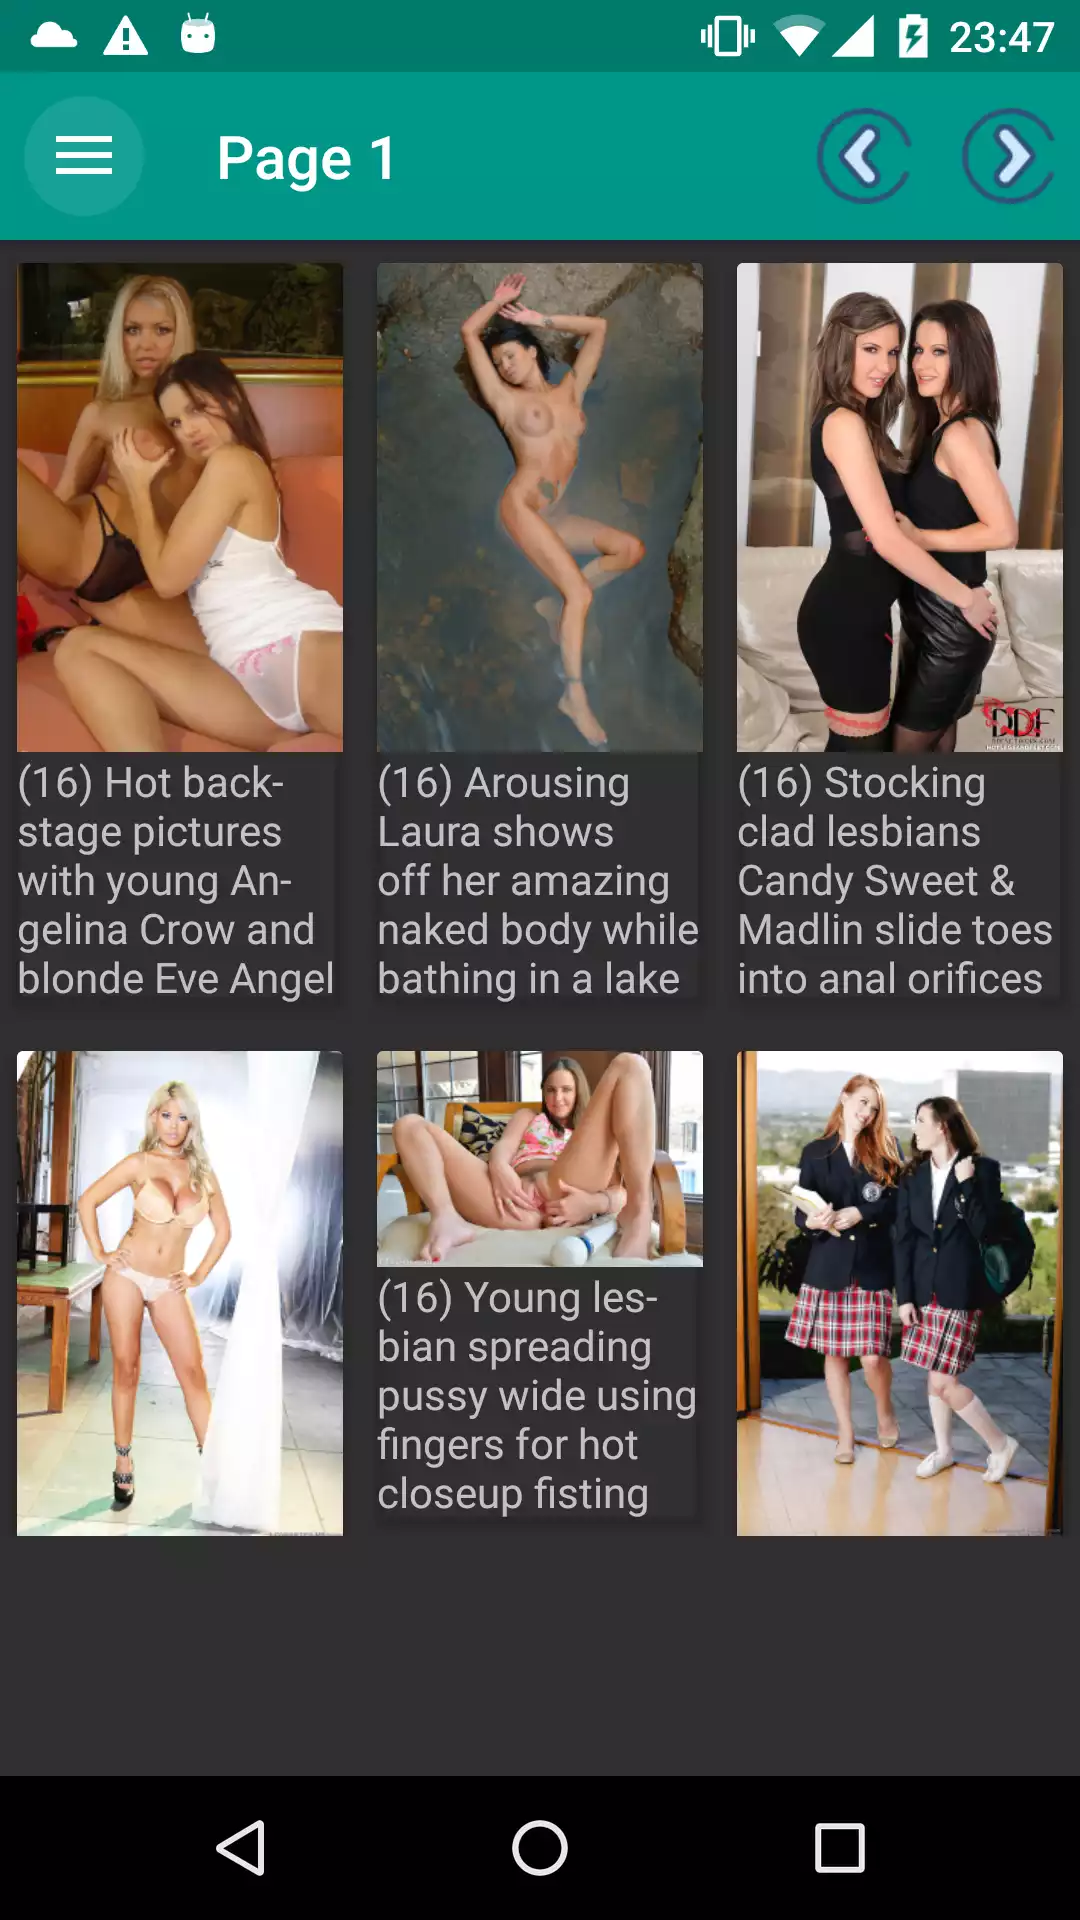 Lesbian Galleries watching,apps,best,wallpapers,the,sexy,app,adult,porn,apk,futanari,henti,adultwallpapers,pics,gallery,download,photos,lisa,hentai,nhentai,hentail,new,pictures,galleries,topless